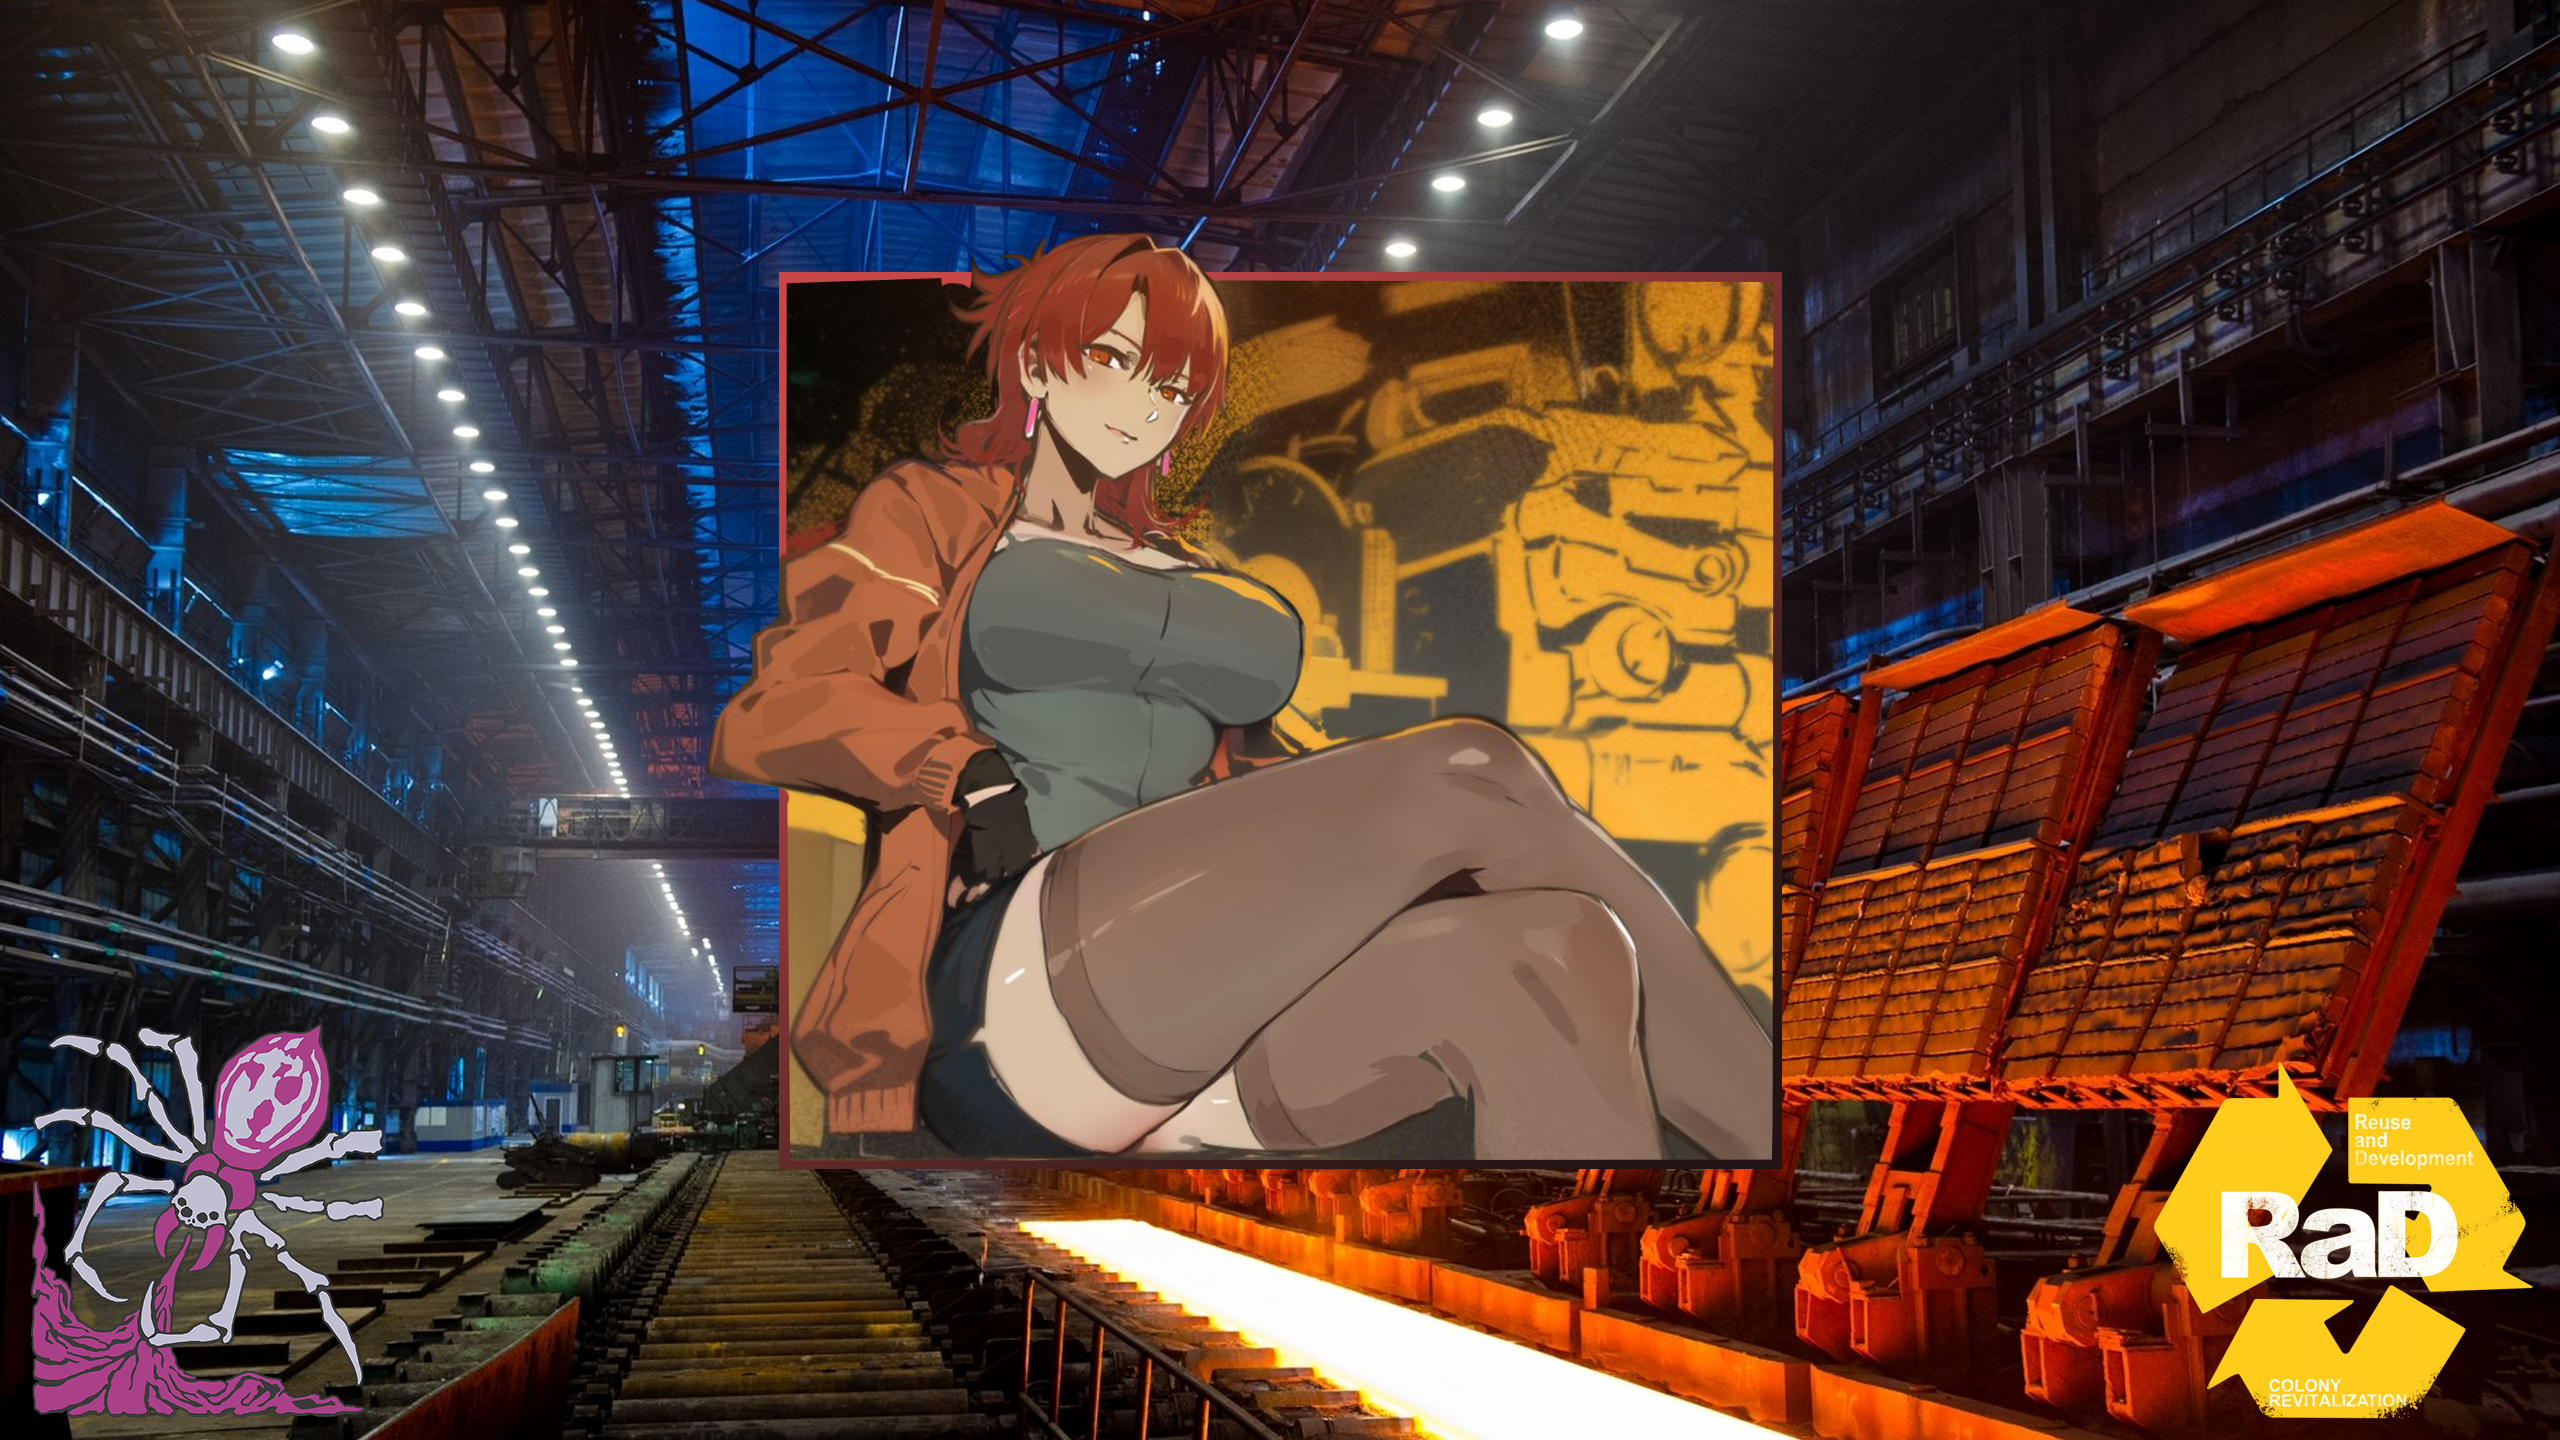 Anime 2560x1440 Armored Core VI carla cinder carla anime girls picture-in-picture smiling Armored Core logo legs crossed stockings gloves fingerless gloves redhead red eyes sitting looking at viewer